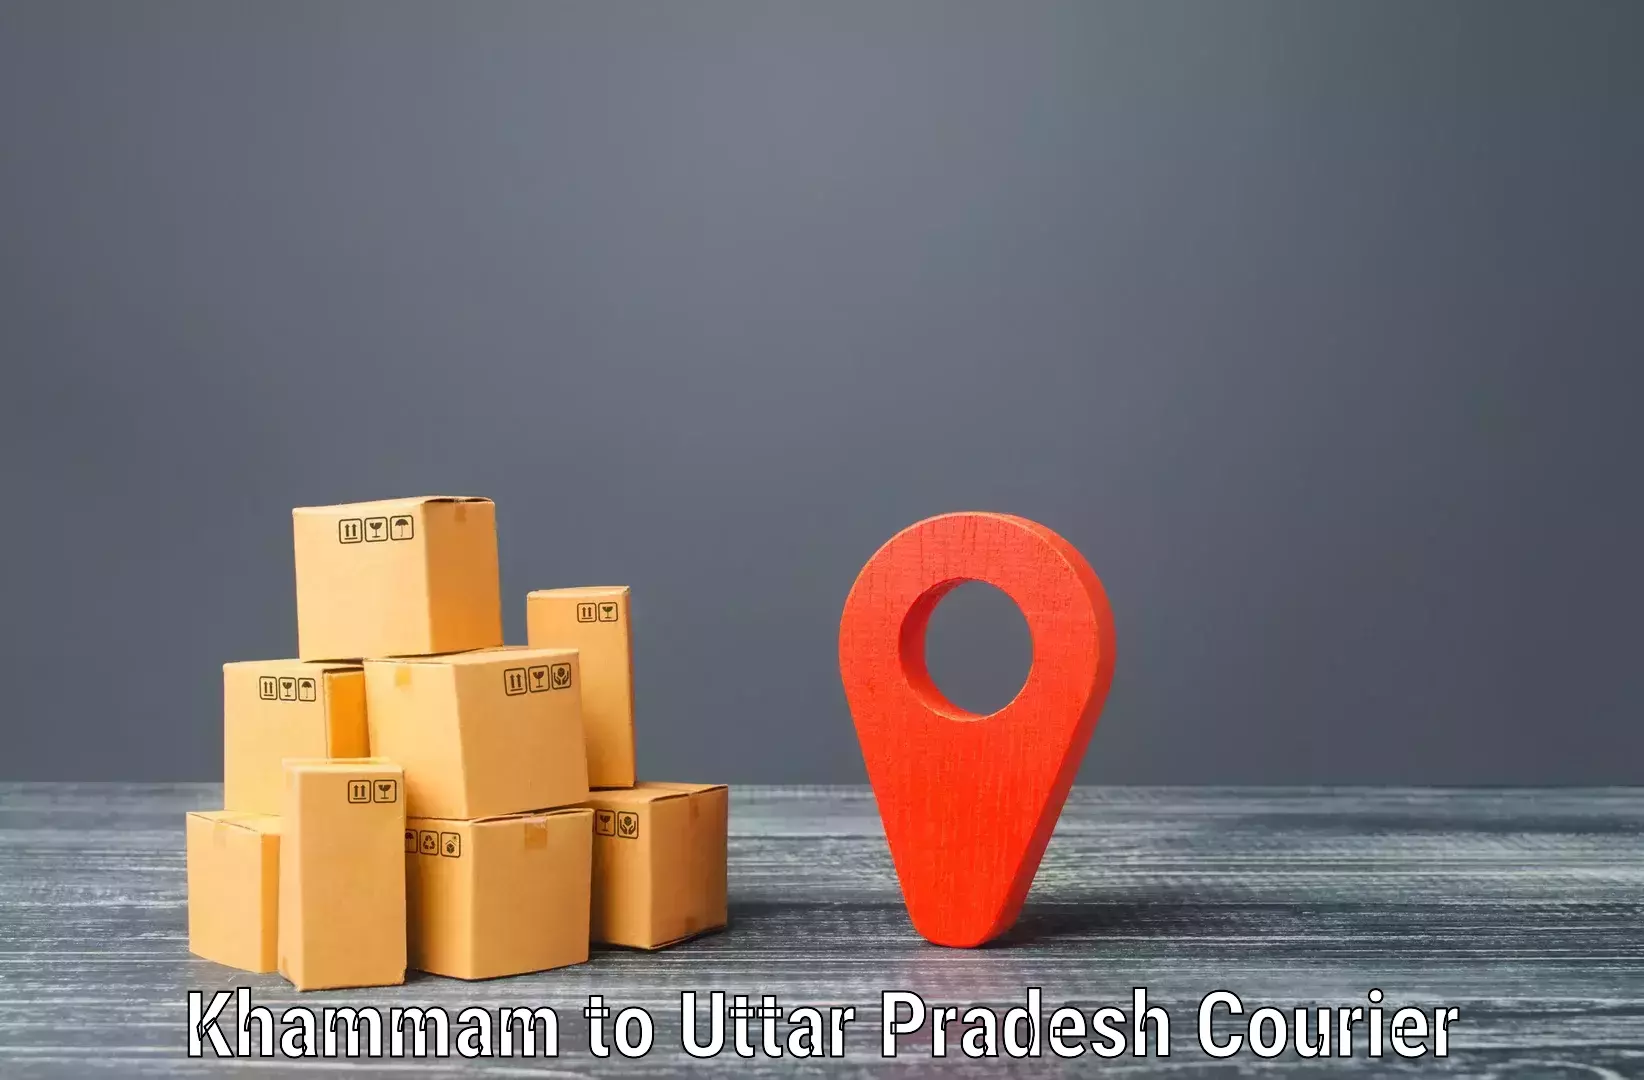 Reliable delivery network Khammam to Noida